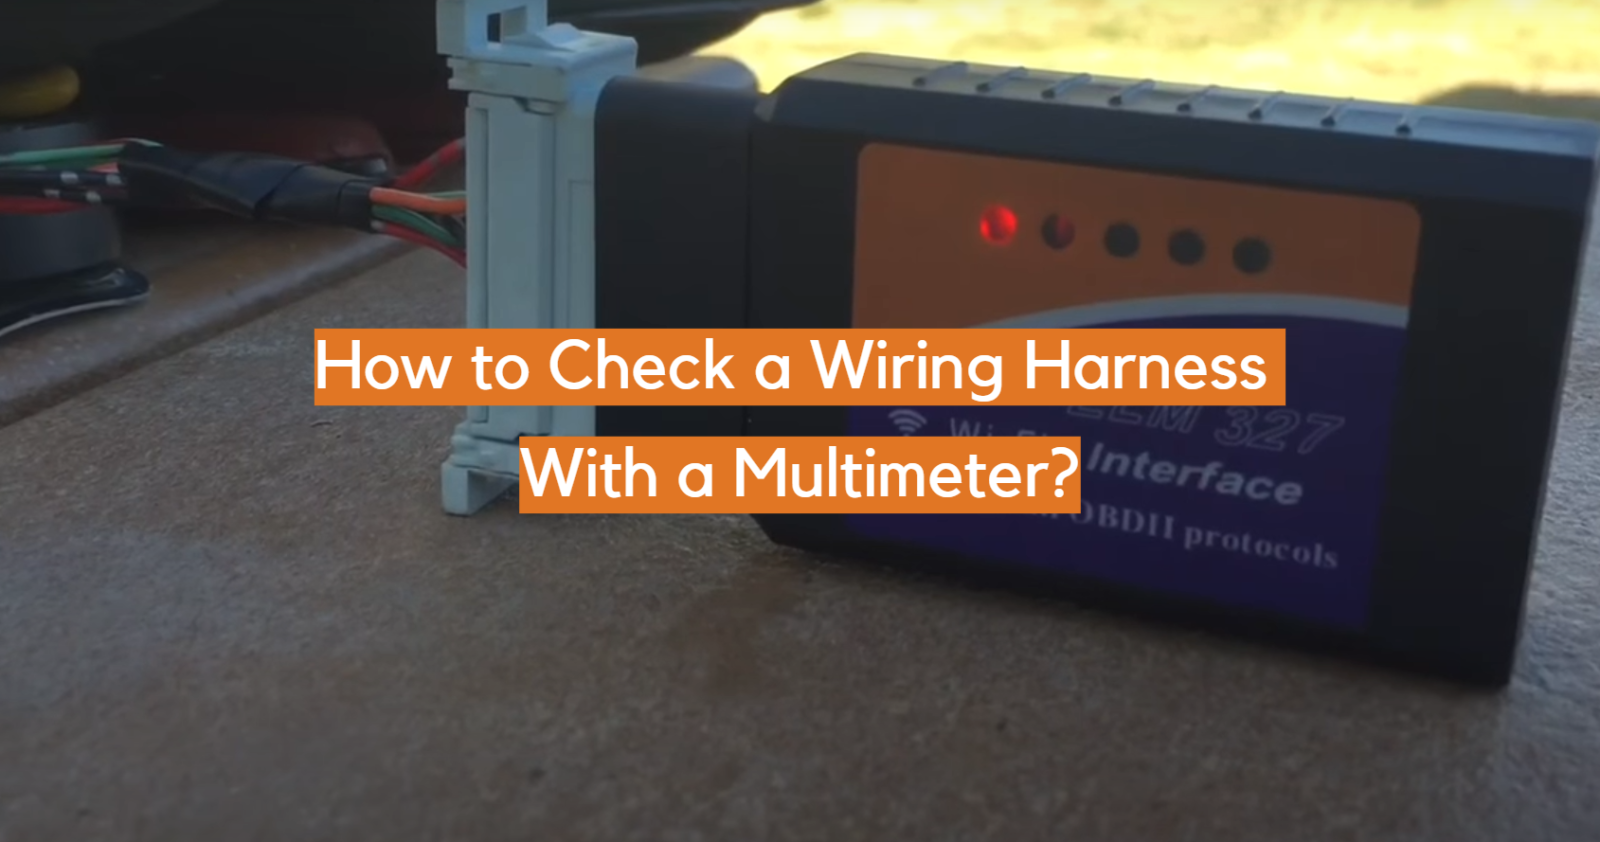 How to Check a Wiring Harness With a Multimeter?